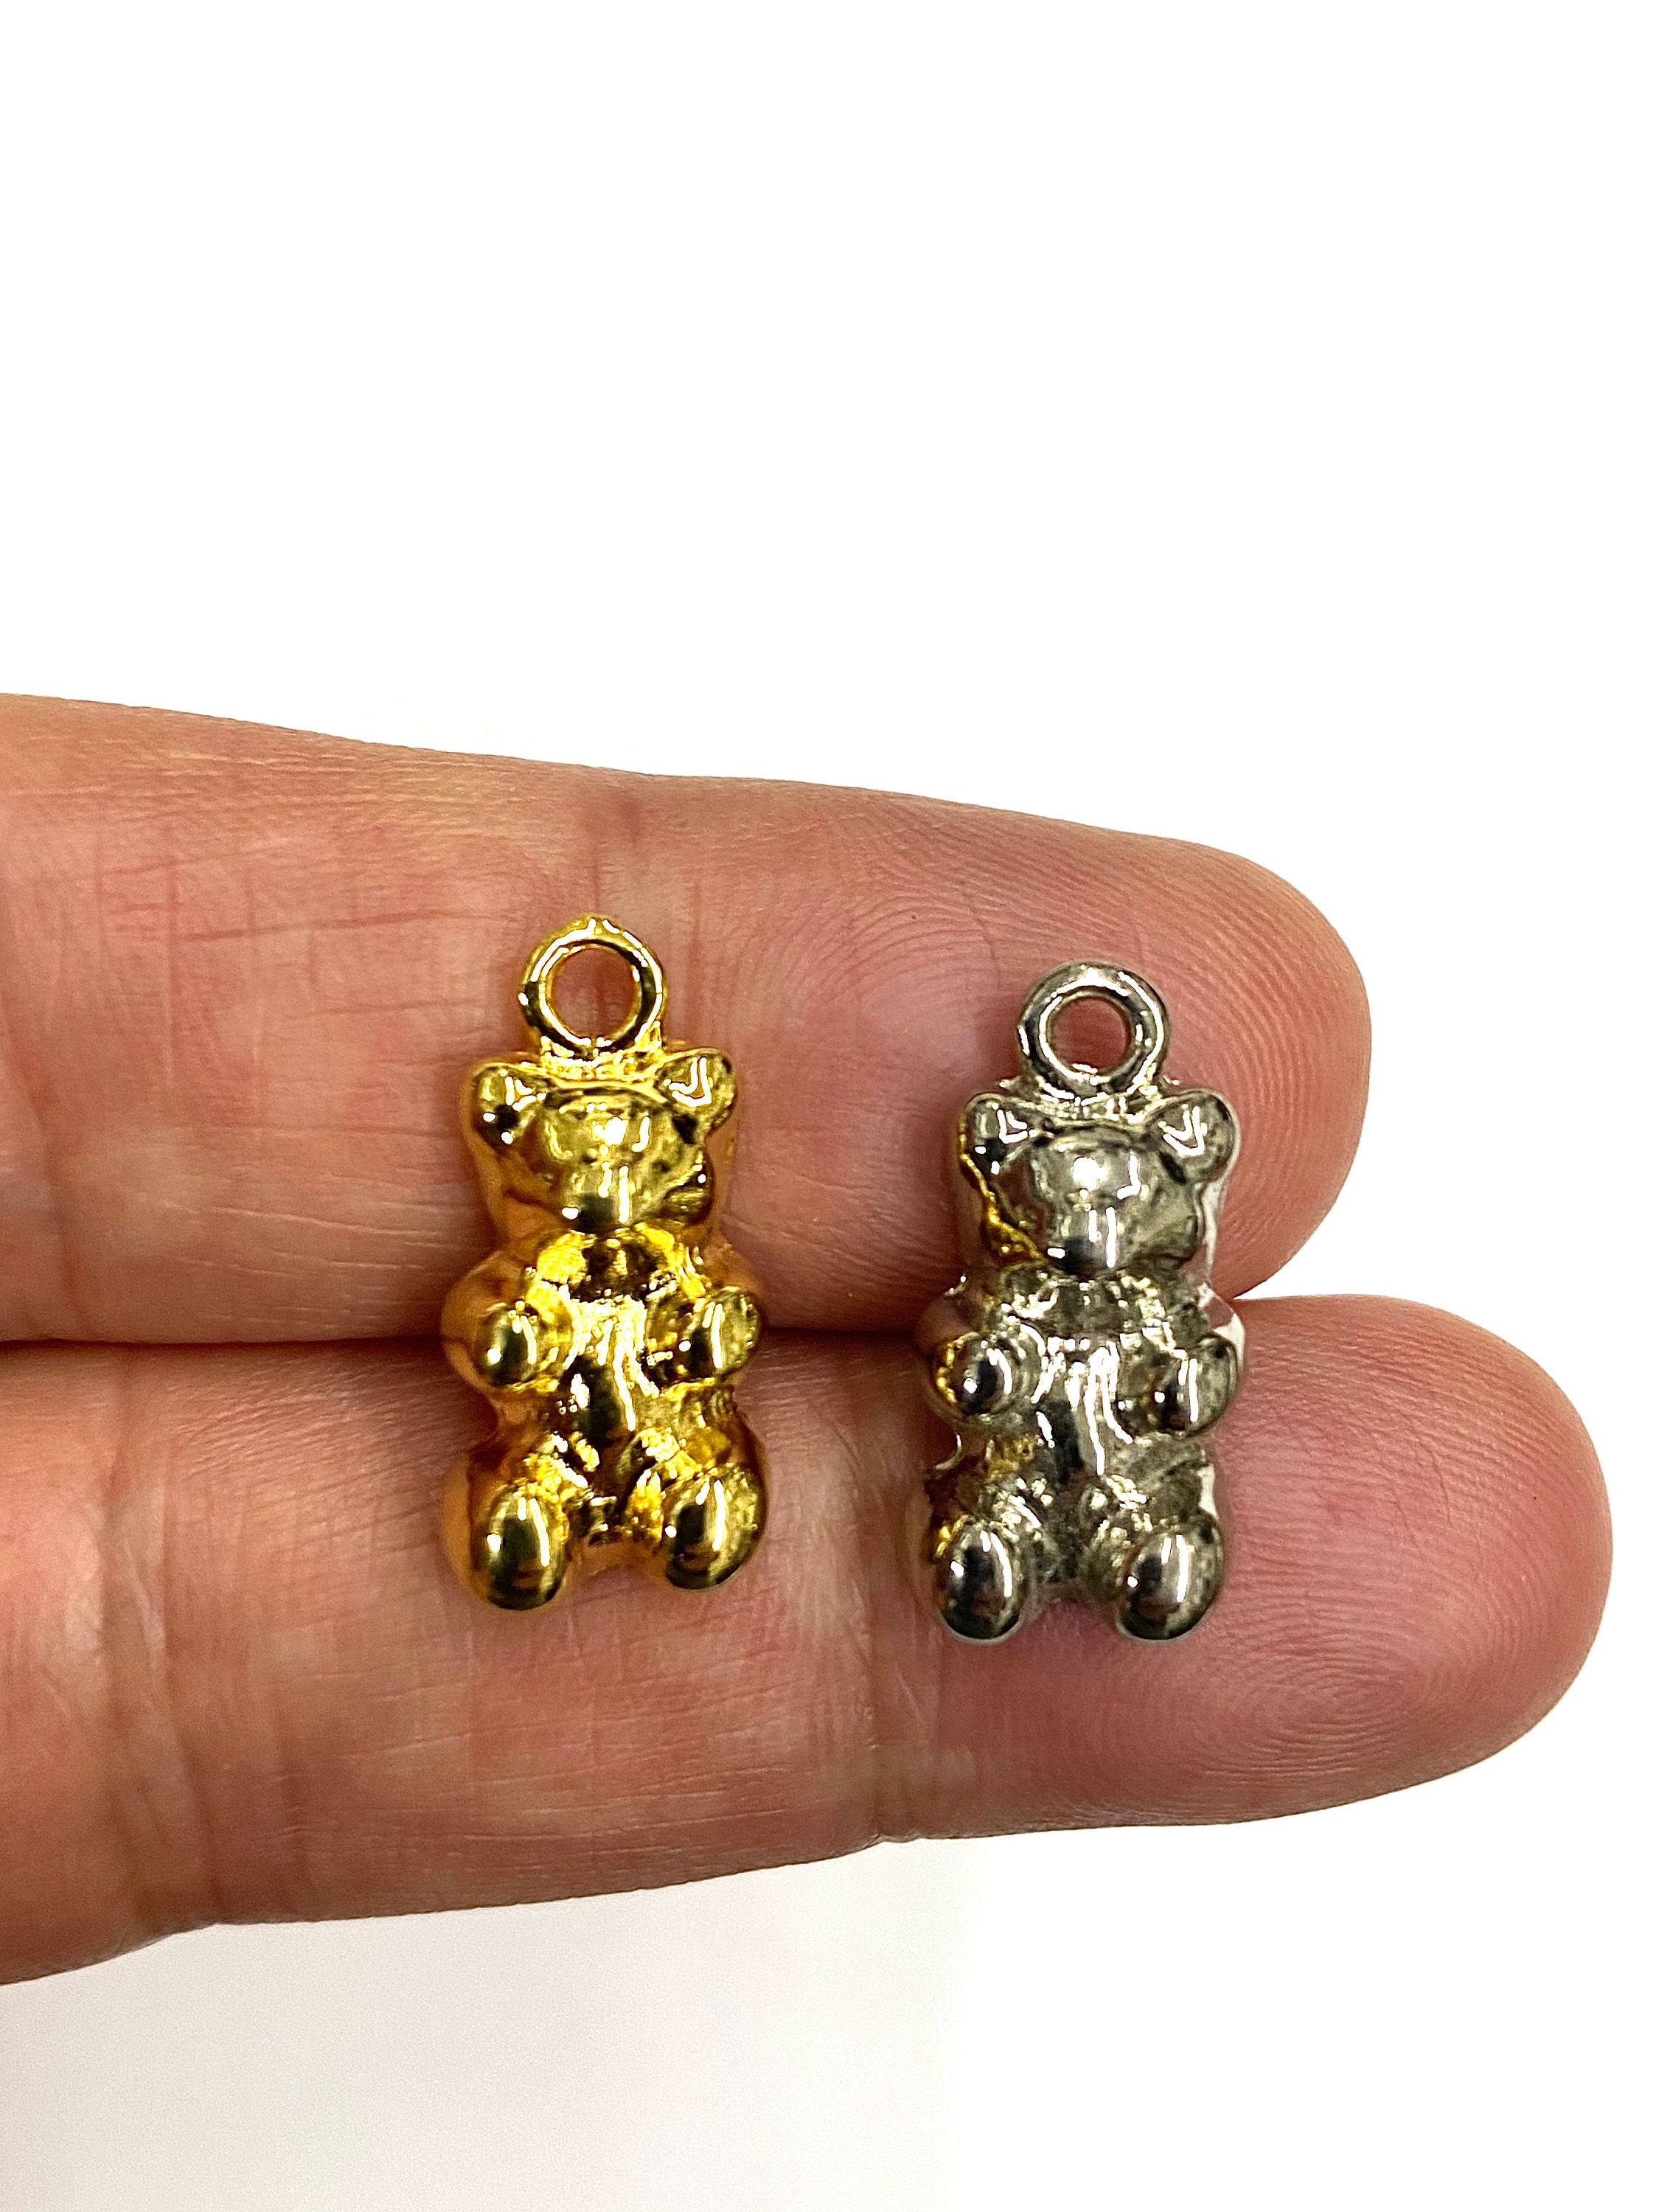 S​hiny Gold Plated Jelly Gummy Bear Pendant - multicolor